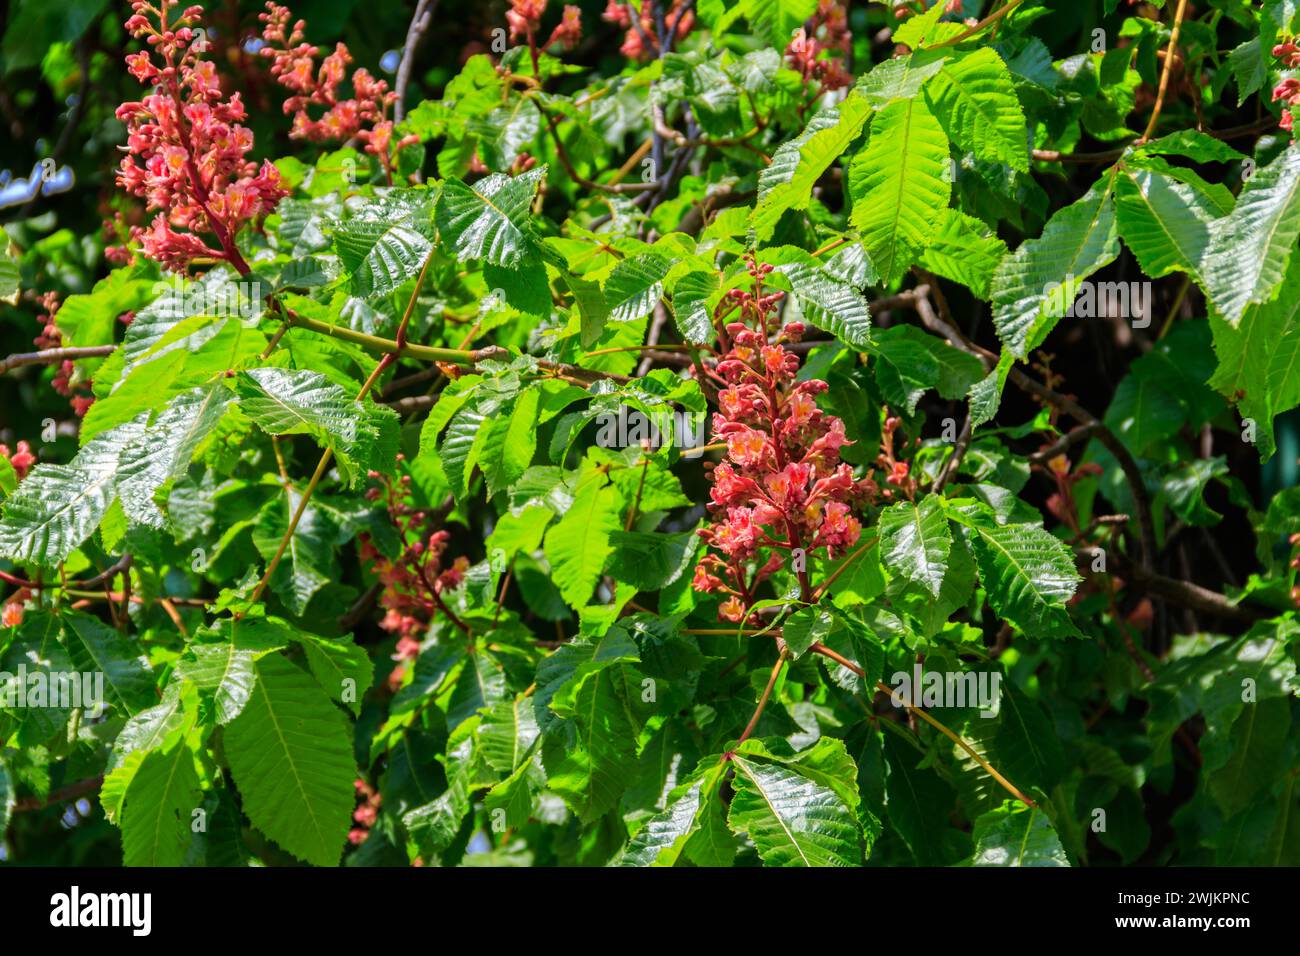 Blooming red horse-chestnut (Aesculus carnea) at spring Stock Photo